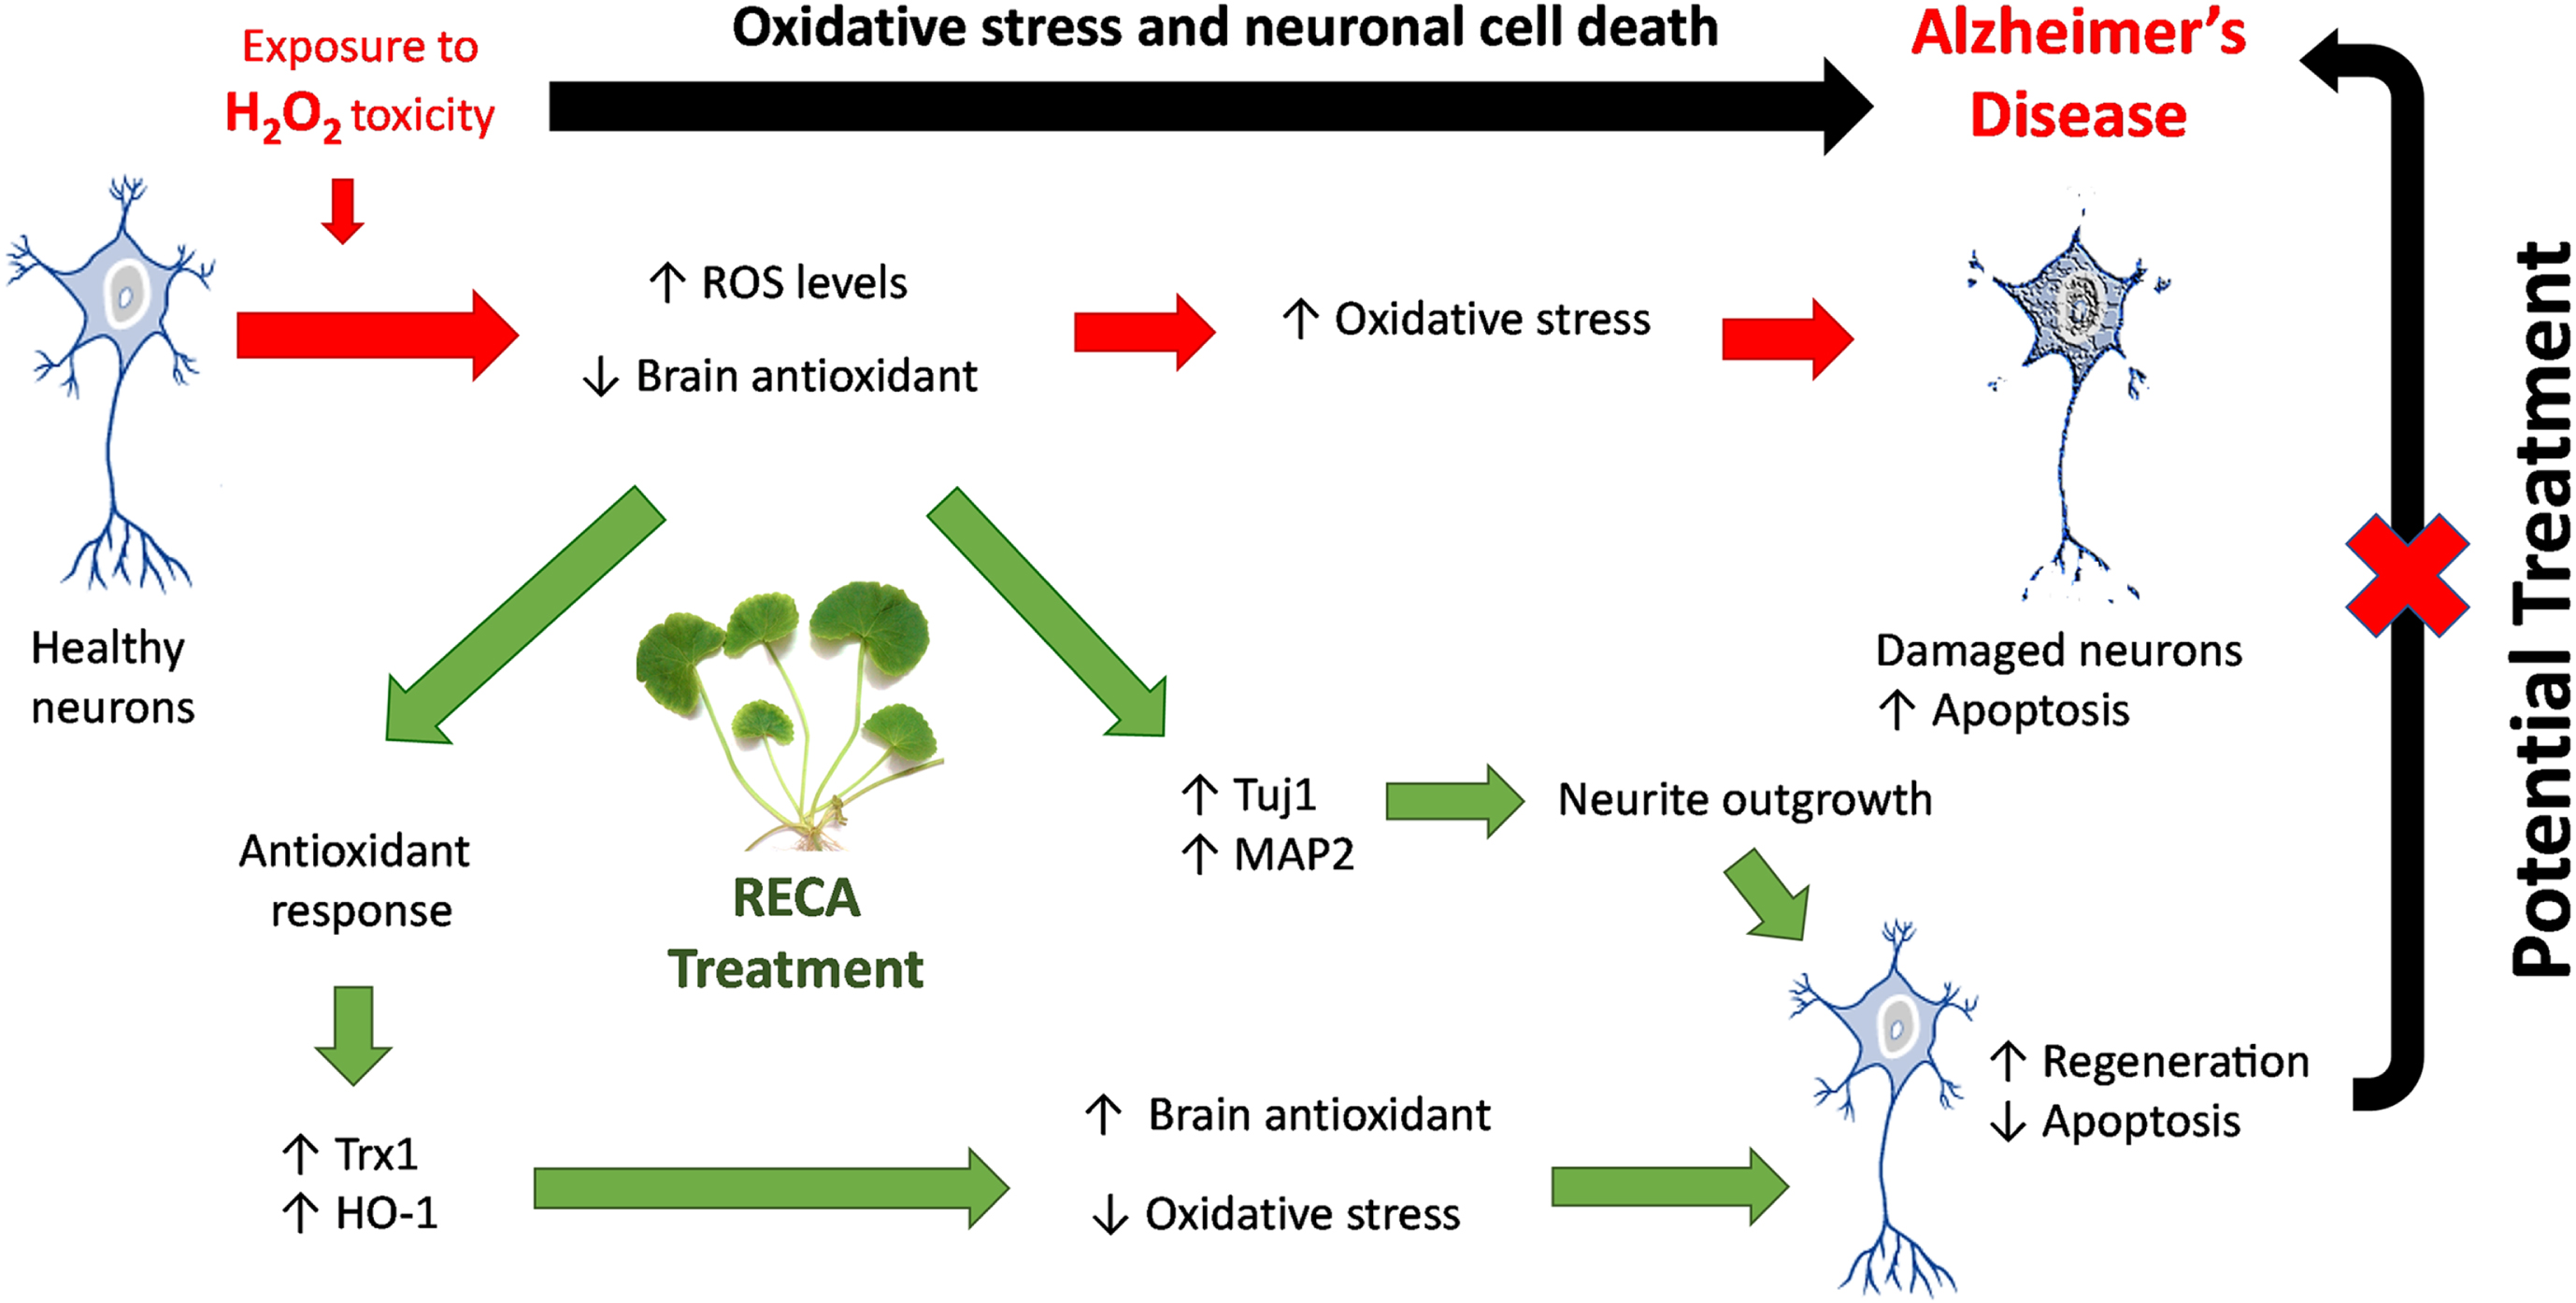 Mechanism of action of RECA as the potential treatment for AD by mitigating oxidative stress. RECA promotes increased expression of antioxidant enzyme genes (i.e., Trx1 and HO-1) to compensate for antioxidant response to oxidative toxicity (i.e.. H2O2). RECA-mediated attenuation of increased ROS in neurons, results in reduced oxidative stress, leading to the restoration of cell viability and the prevention of oxidative stress-induced apoptosis. In addition, RECA promotes neuritic regeneration by modulating Tuj1 and MAP2 genes expression, resulting in the restoration of neuronal structure and function after injury. These potential mechanisms are proposed to be the underlying basis for the restoration of neuronal function and structure after injury demonstrated in oxidative stress-induced AD treated with RECA.